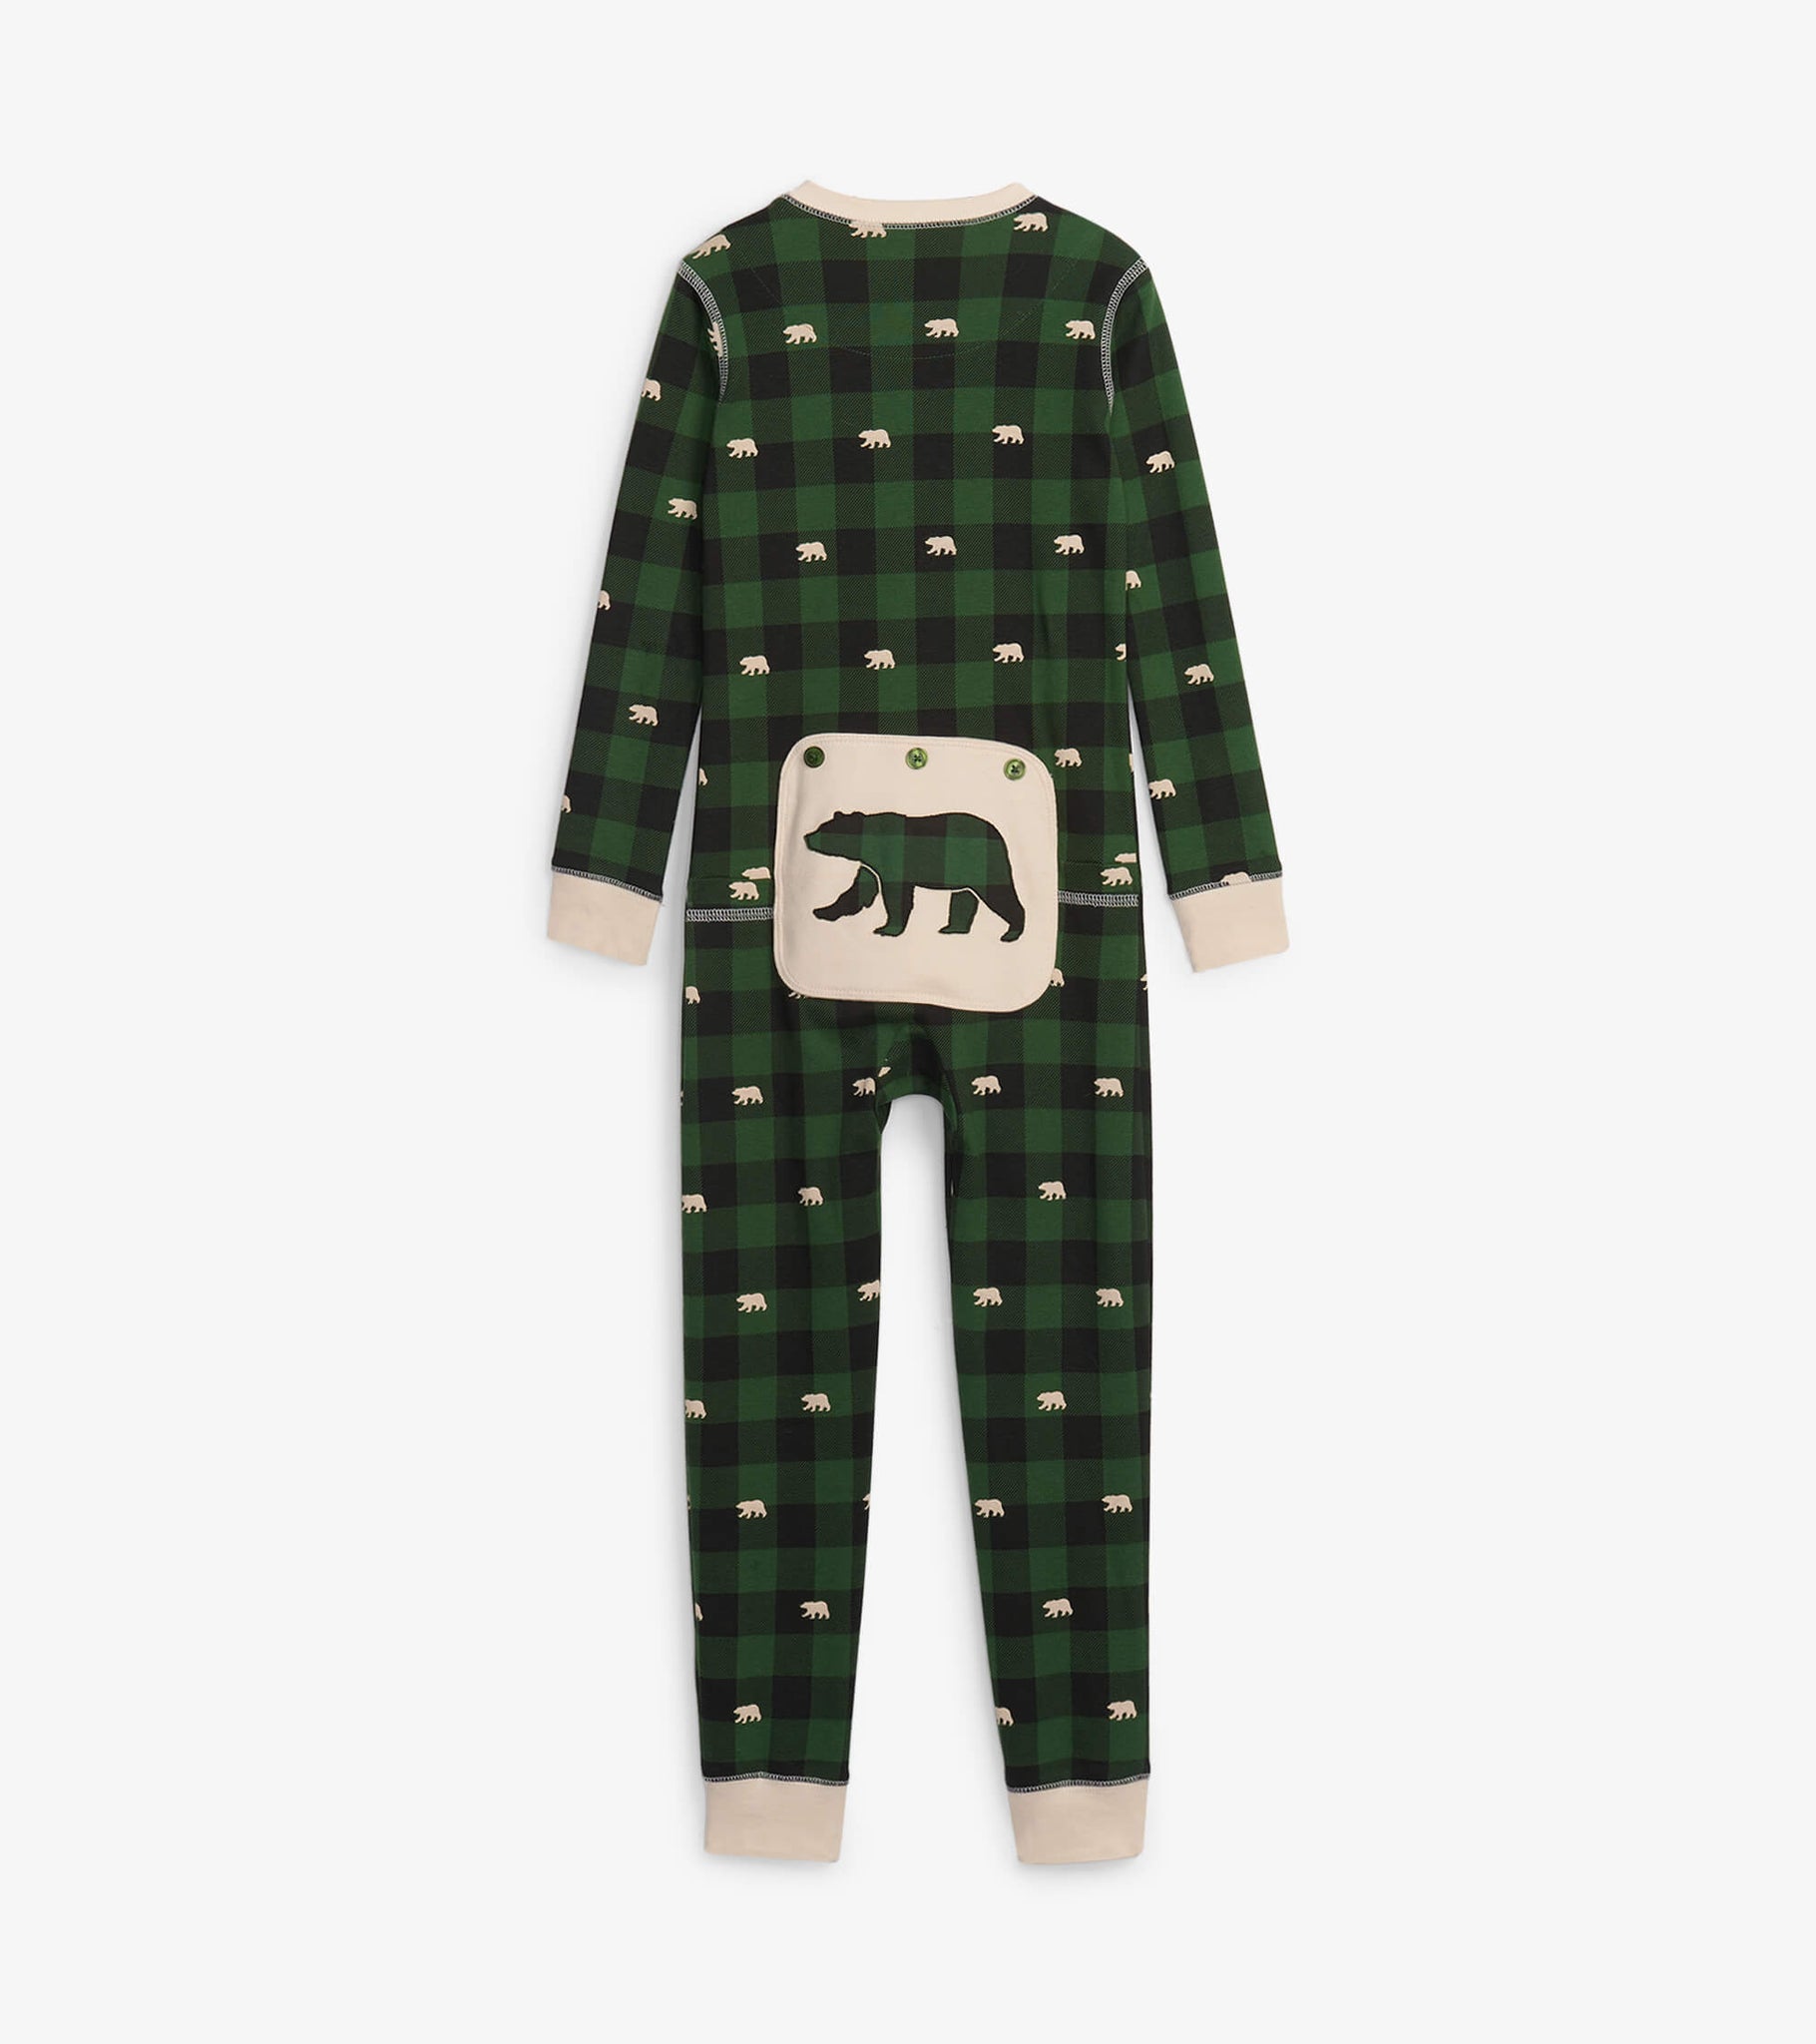 Green Plaid Union Suit - Kids/Youth